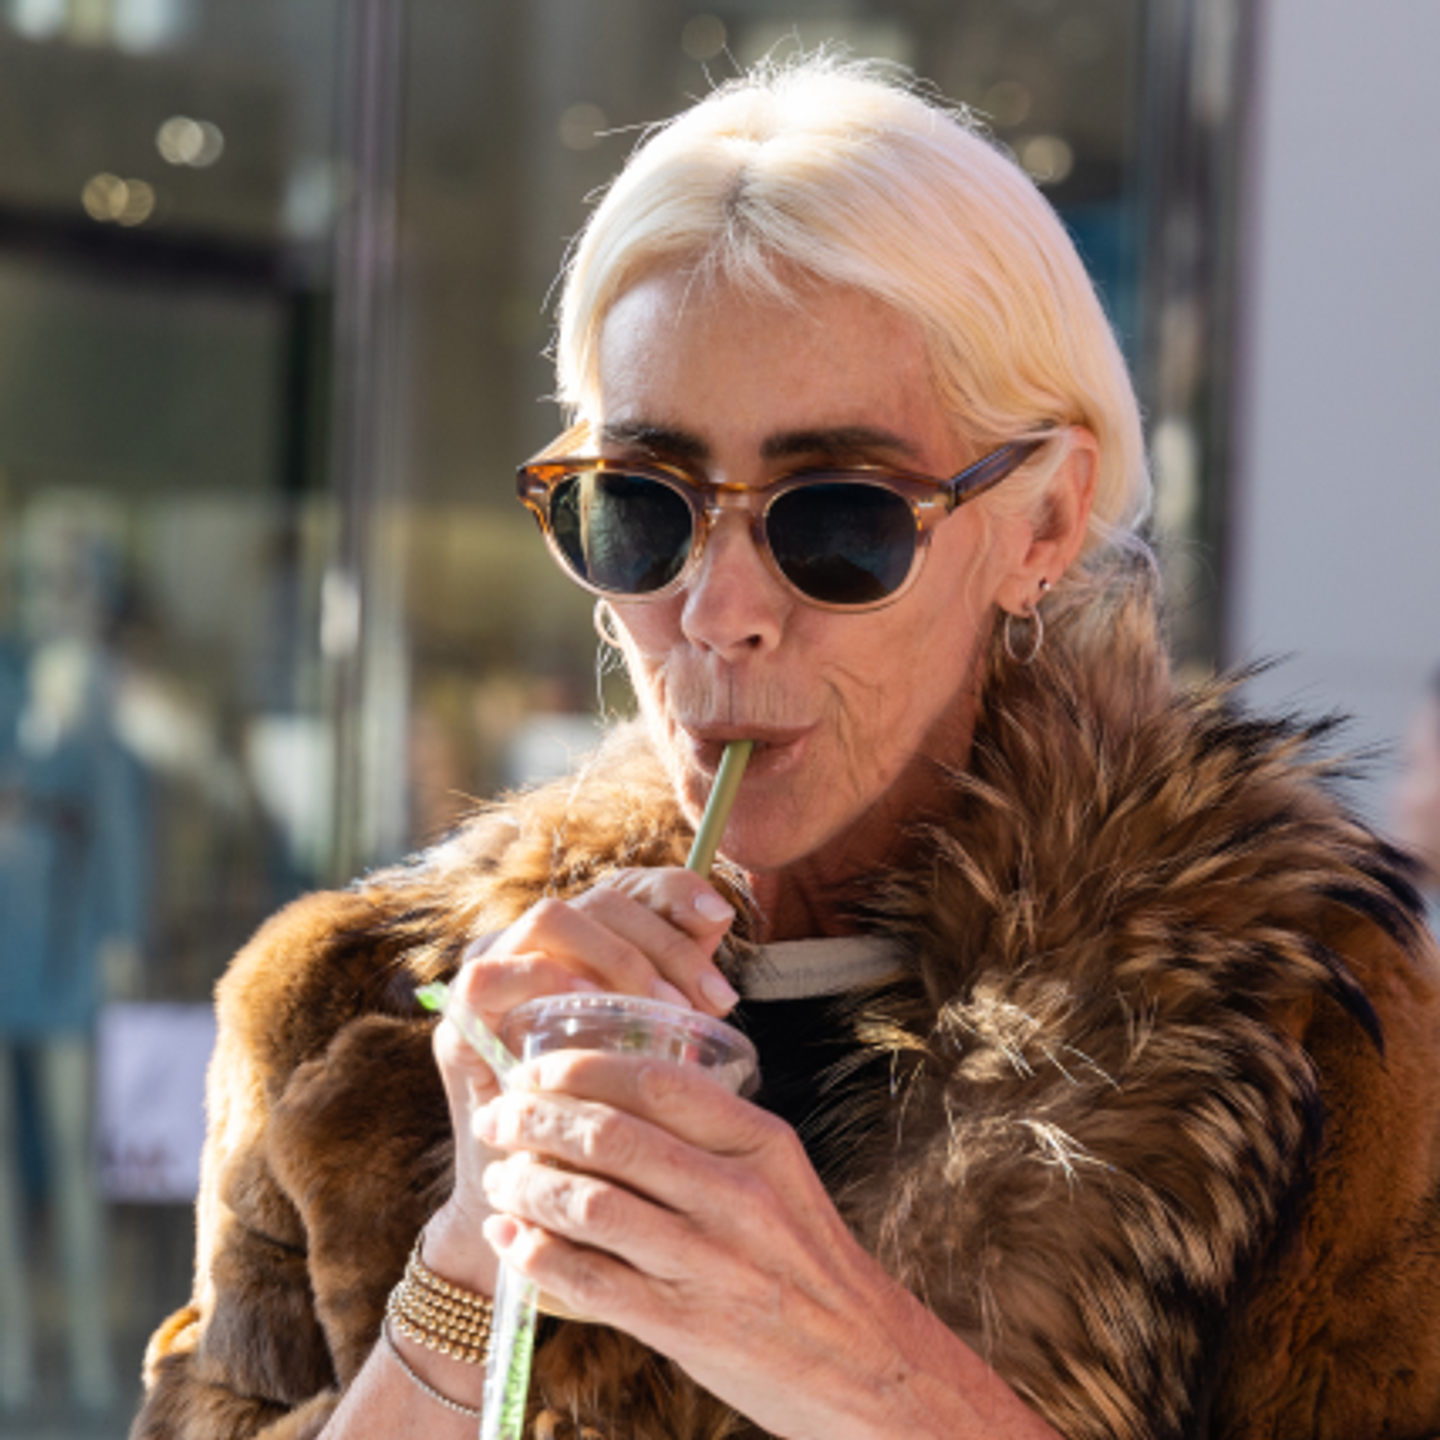 Woman in fur coat and sunglasses sipping drink through a straw.